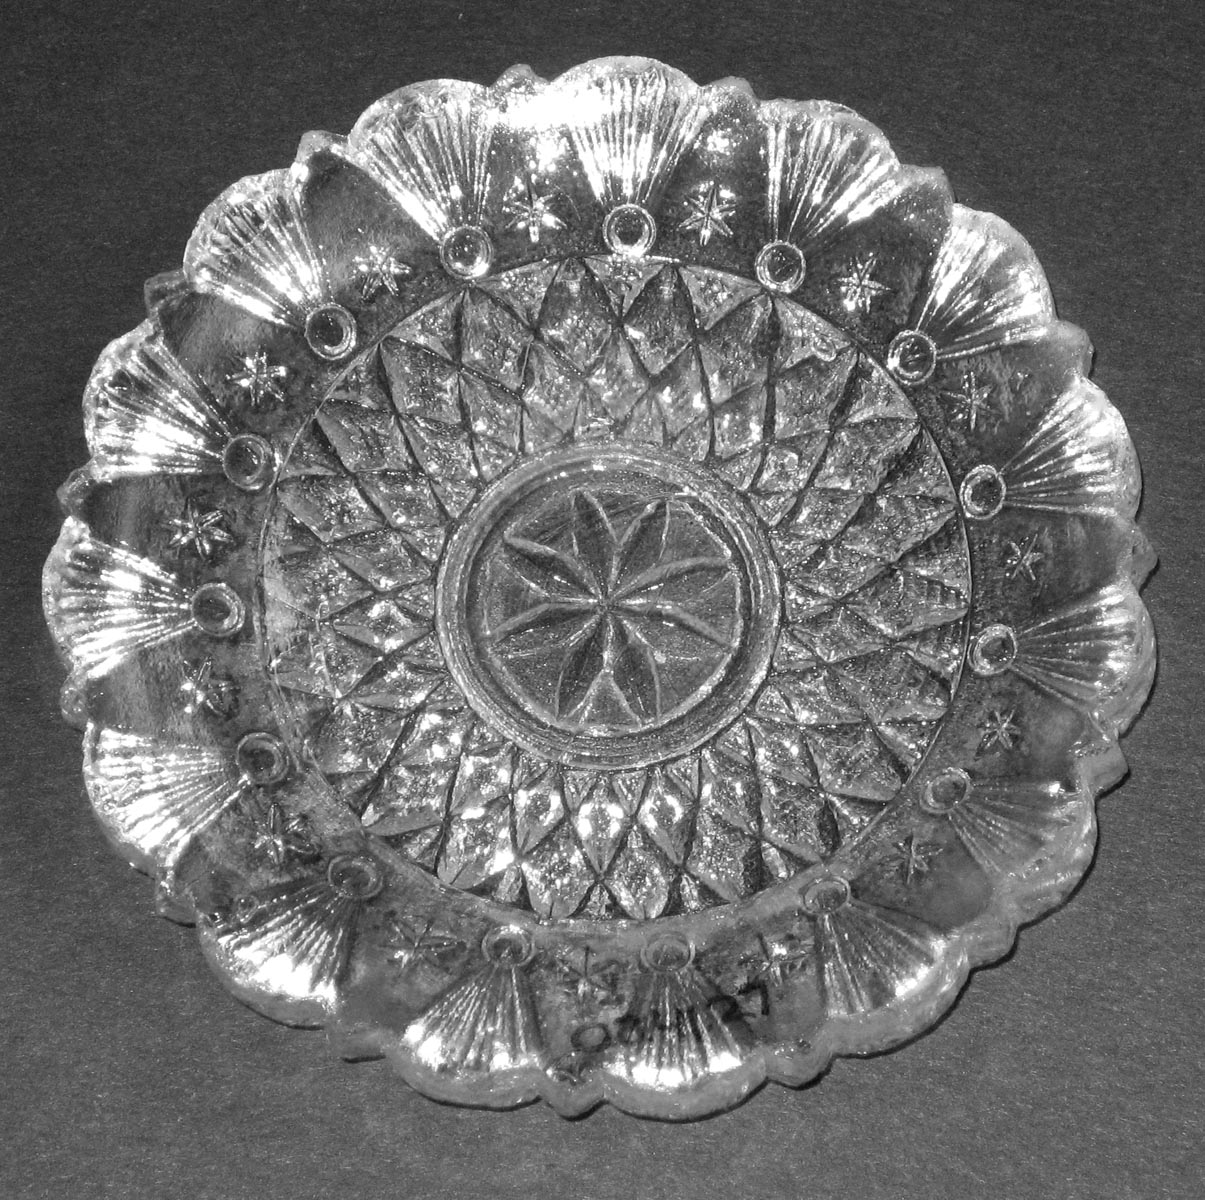 2003.0041.027 Glass cup plate